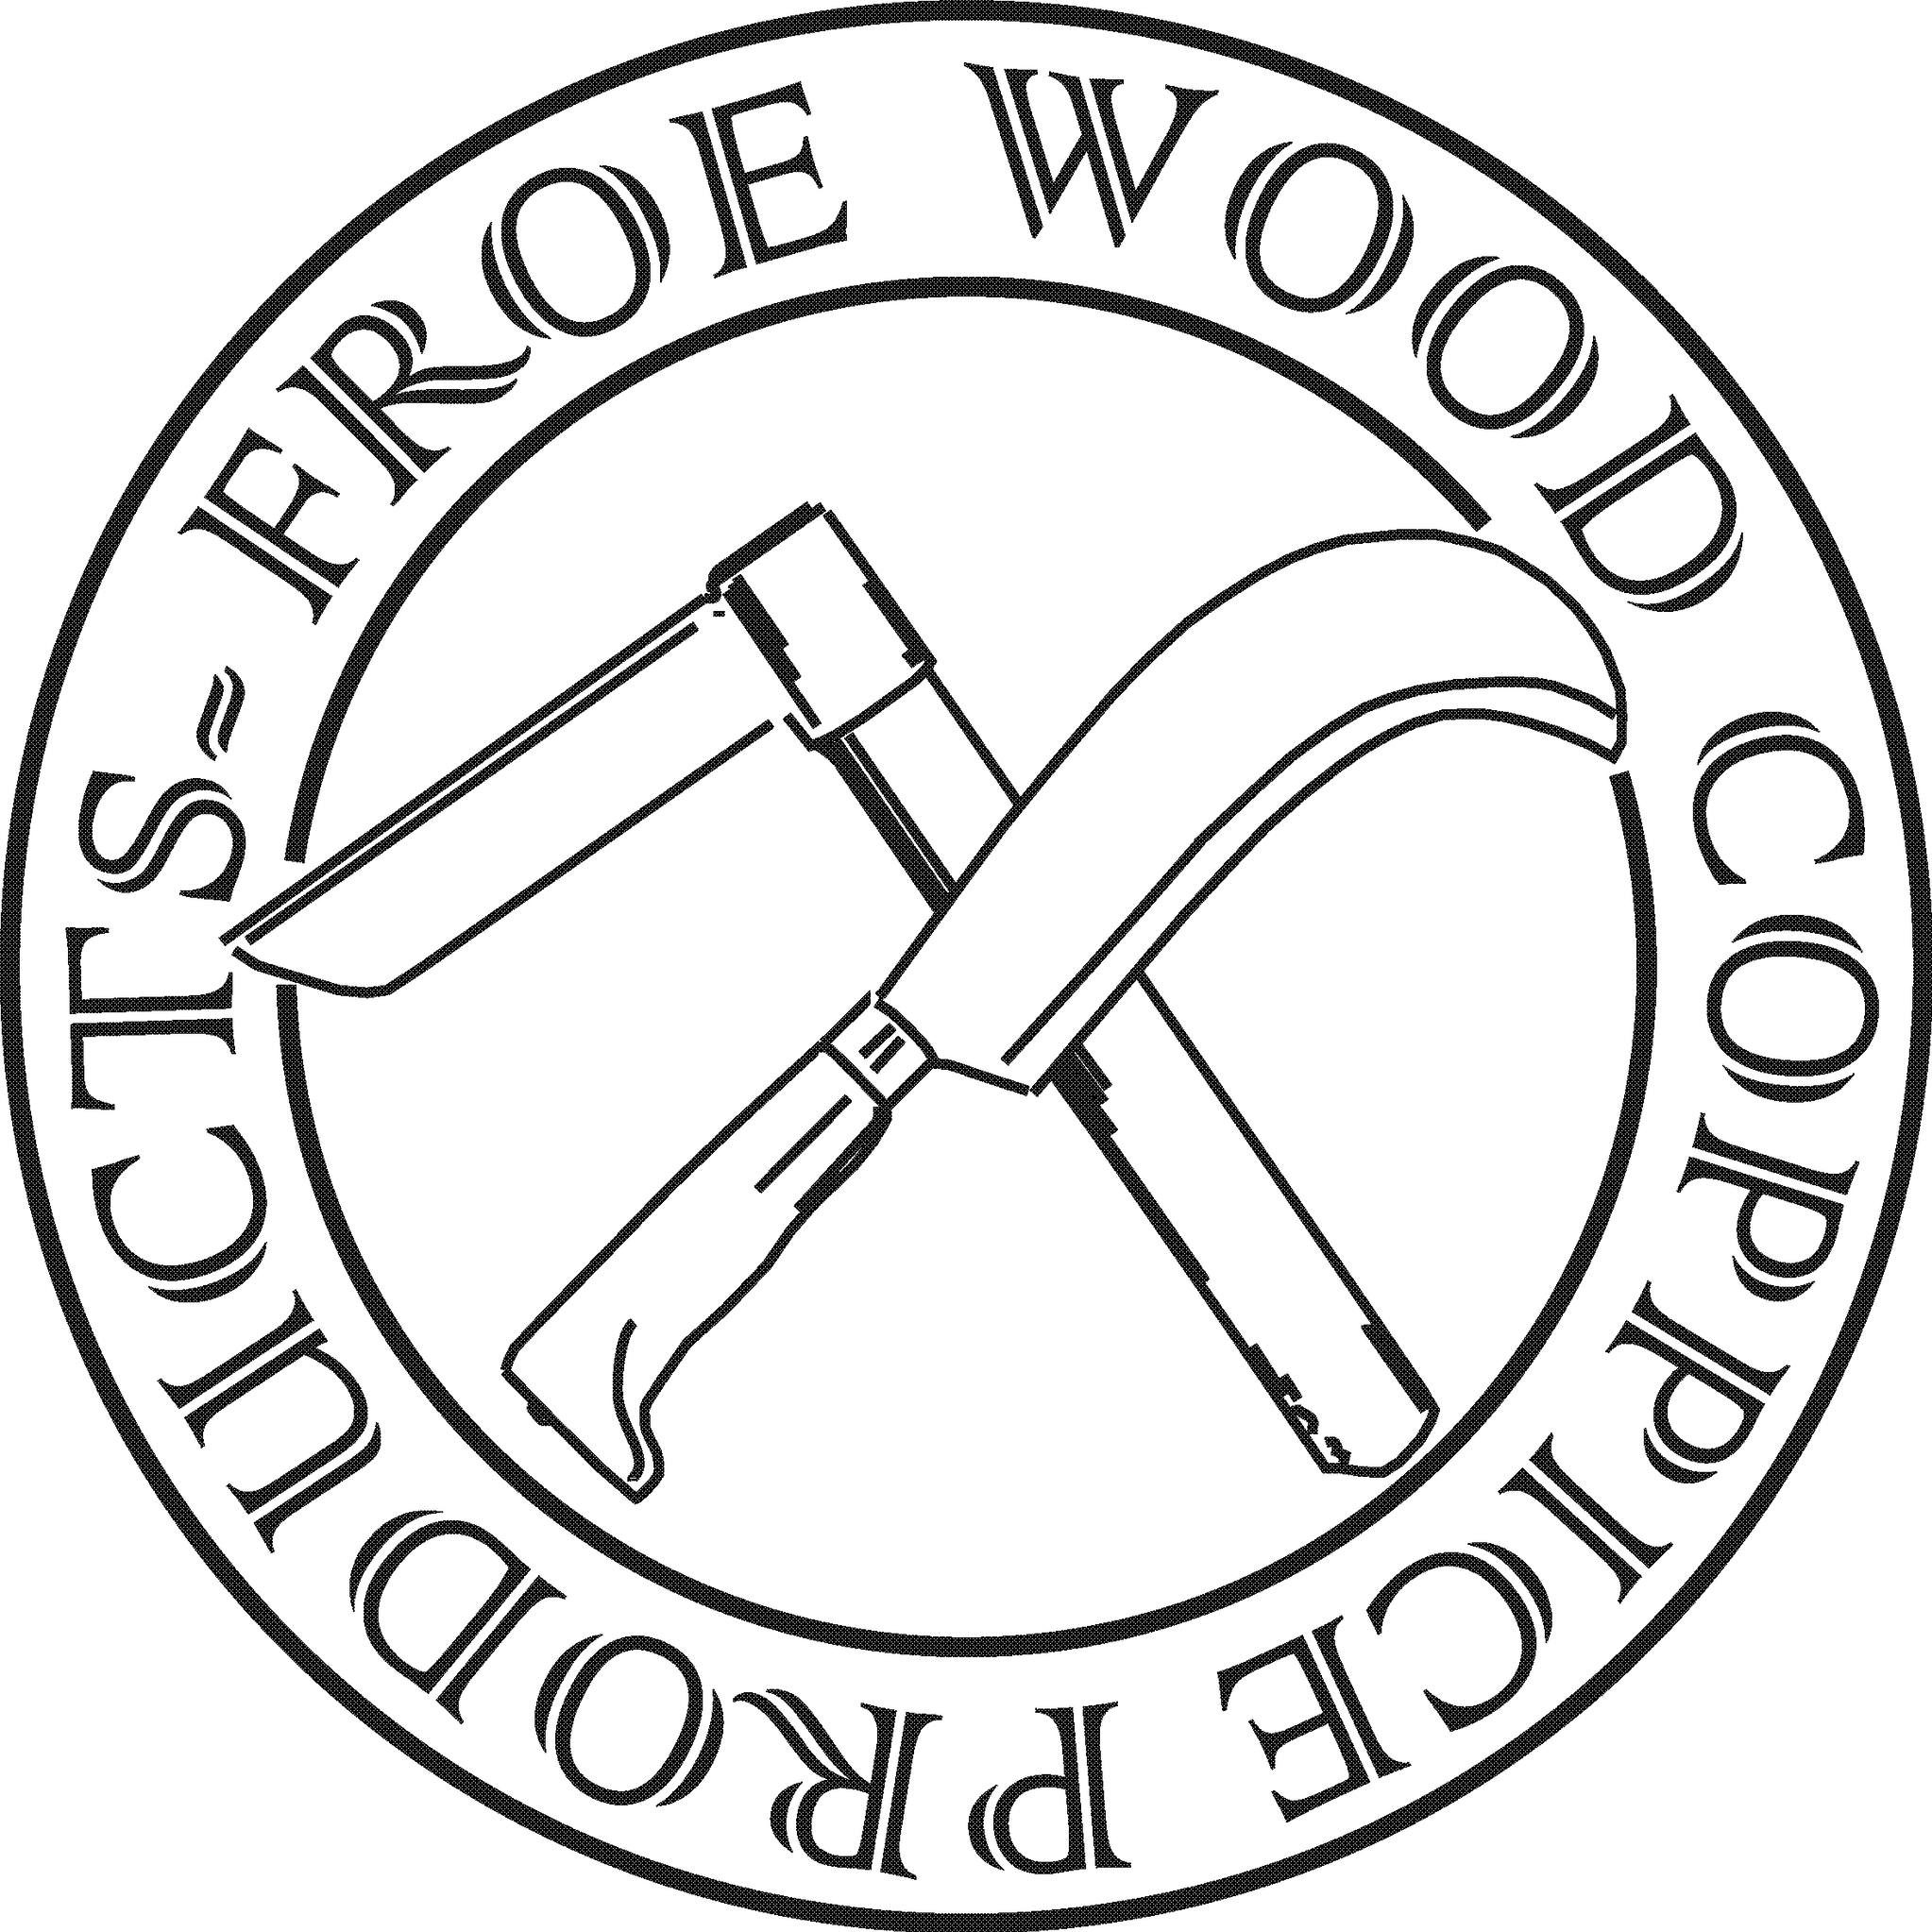 Froe Wood Coppice Products